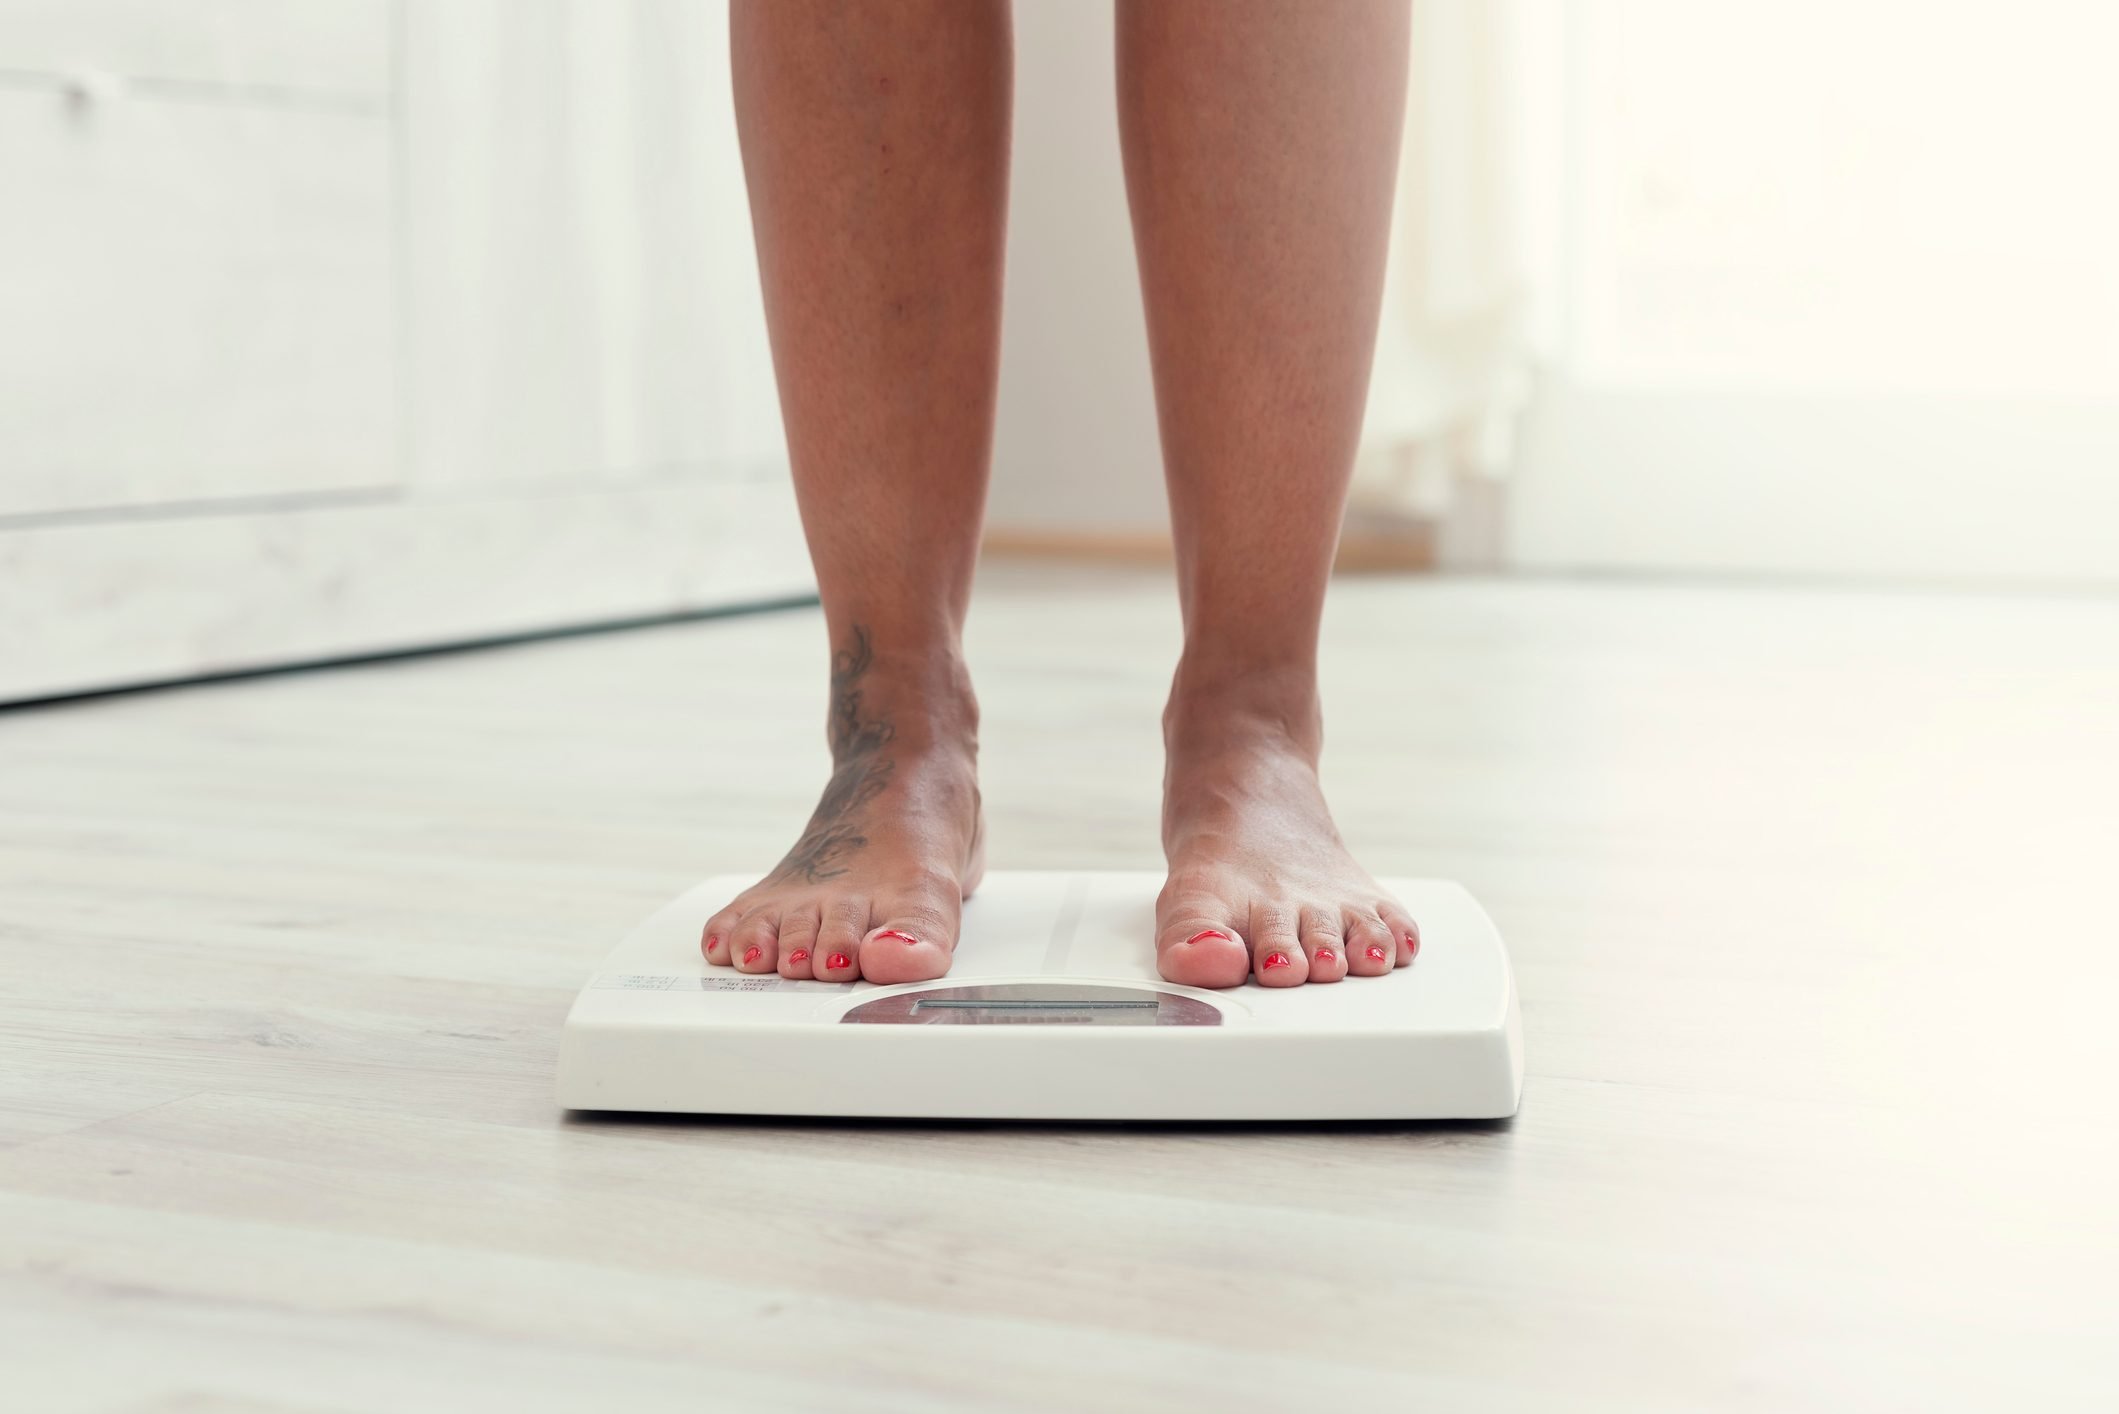 The Best Way to Keep Weight Off? Weigh Yourself This Often, Says New Study